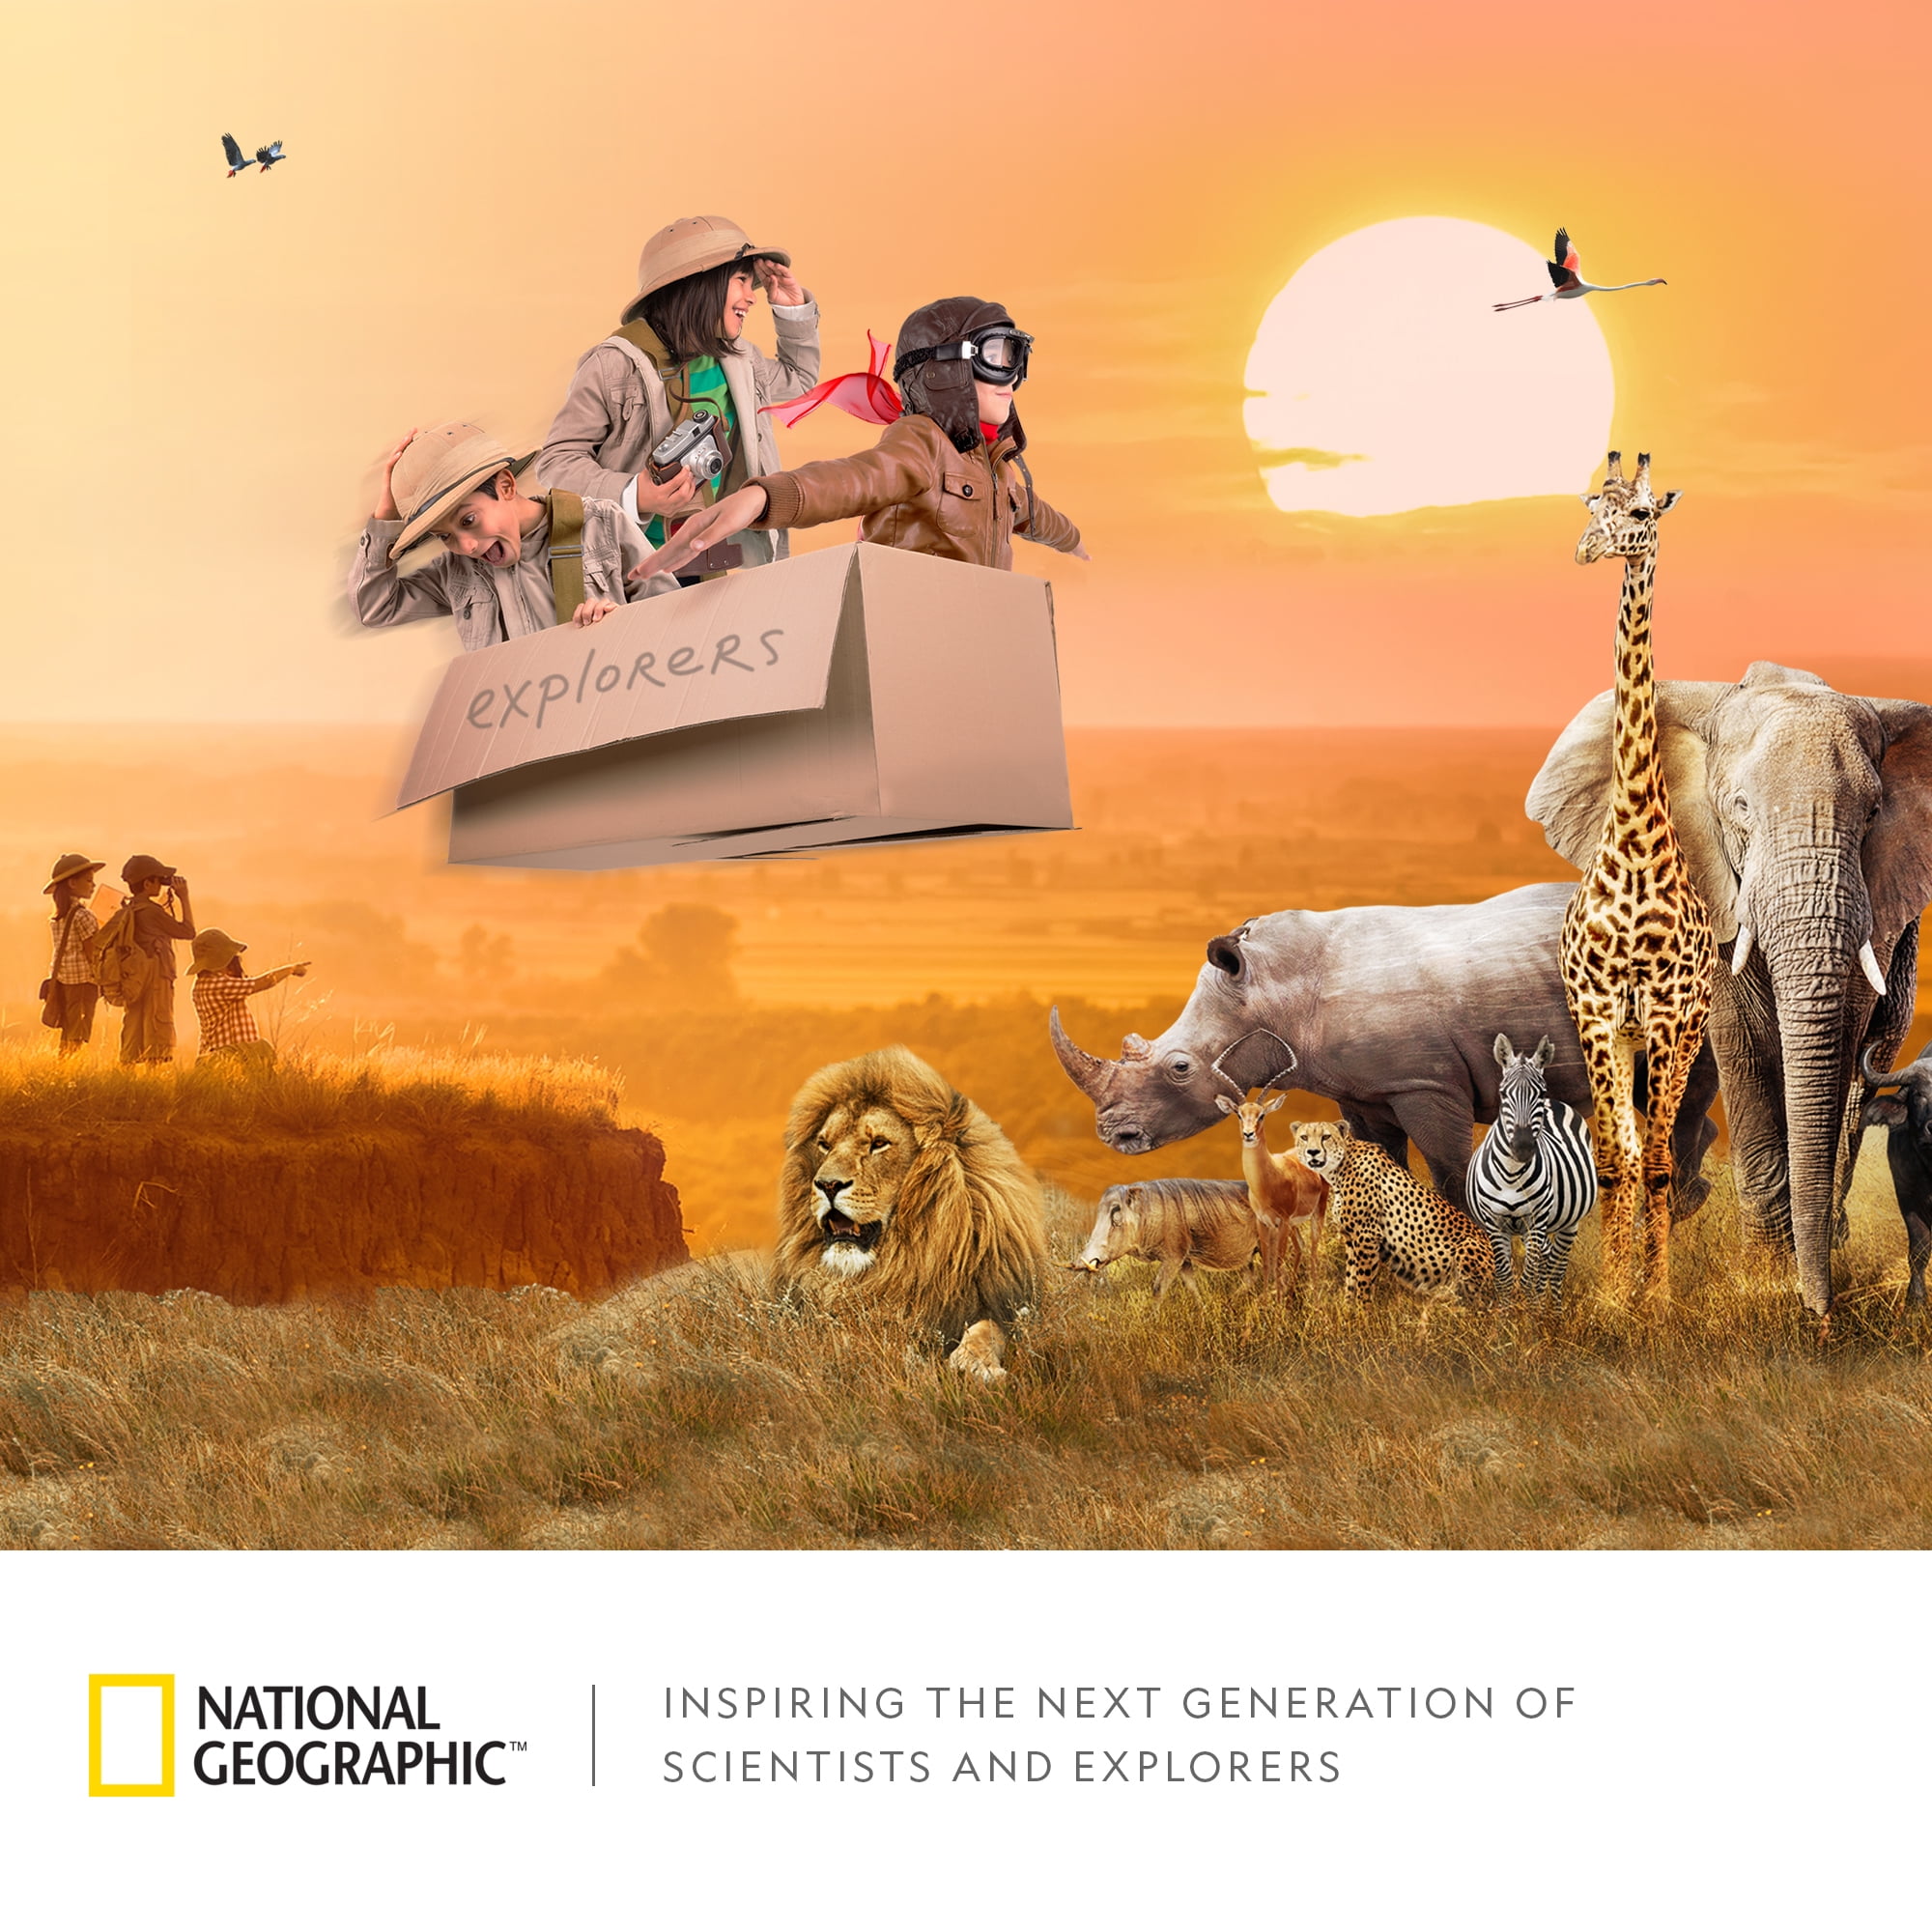 National Geographic Science Kit: The reflex barrier & the hot wire